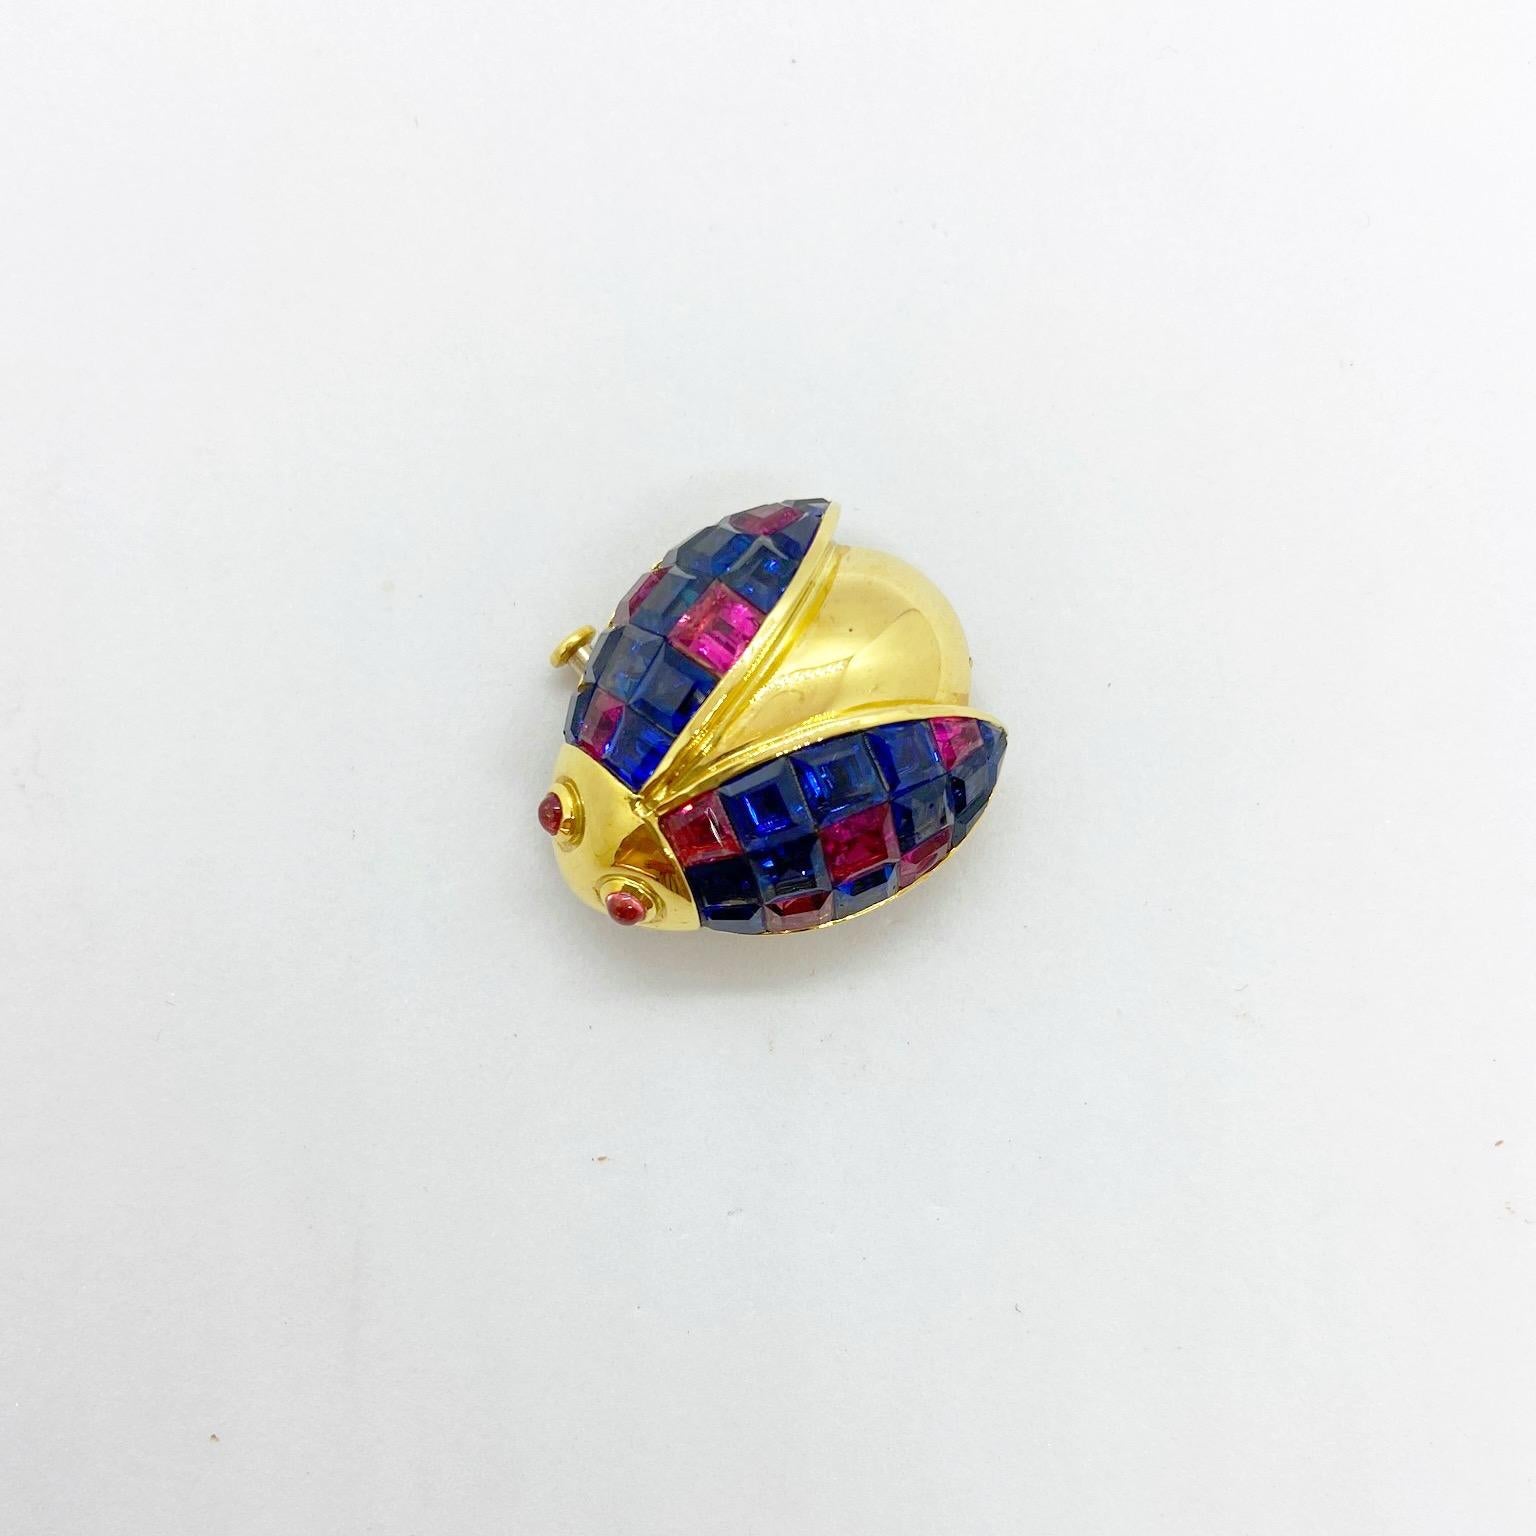 Contemporary Sabbadini 18 Karat Gold Ladybug Brooch with 8.56 Carat Blue and Pink Sapphires For Sale